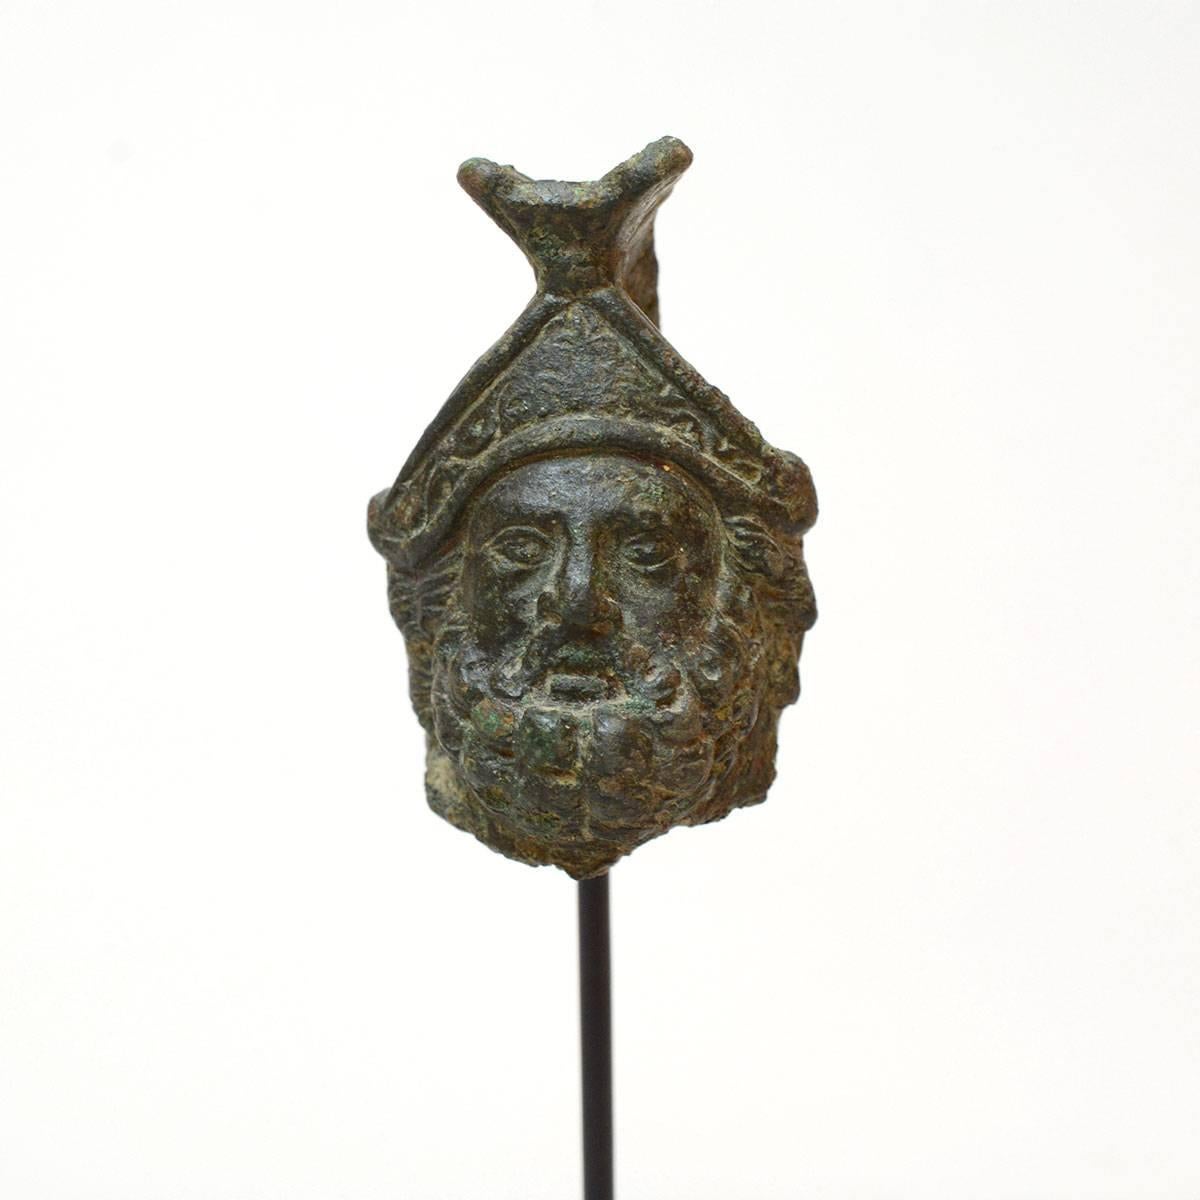 God of war and secret lover of the goddess of love, Venus, Mars (Greek: Ares) was a dominant figure in the pantheon of the militaristic Roman world. Due to its small size, it is likely that this head was once a full-bodied figurine, used as an